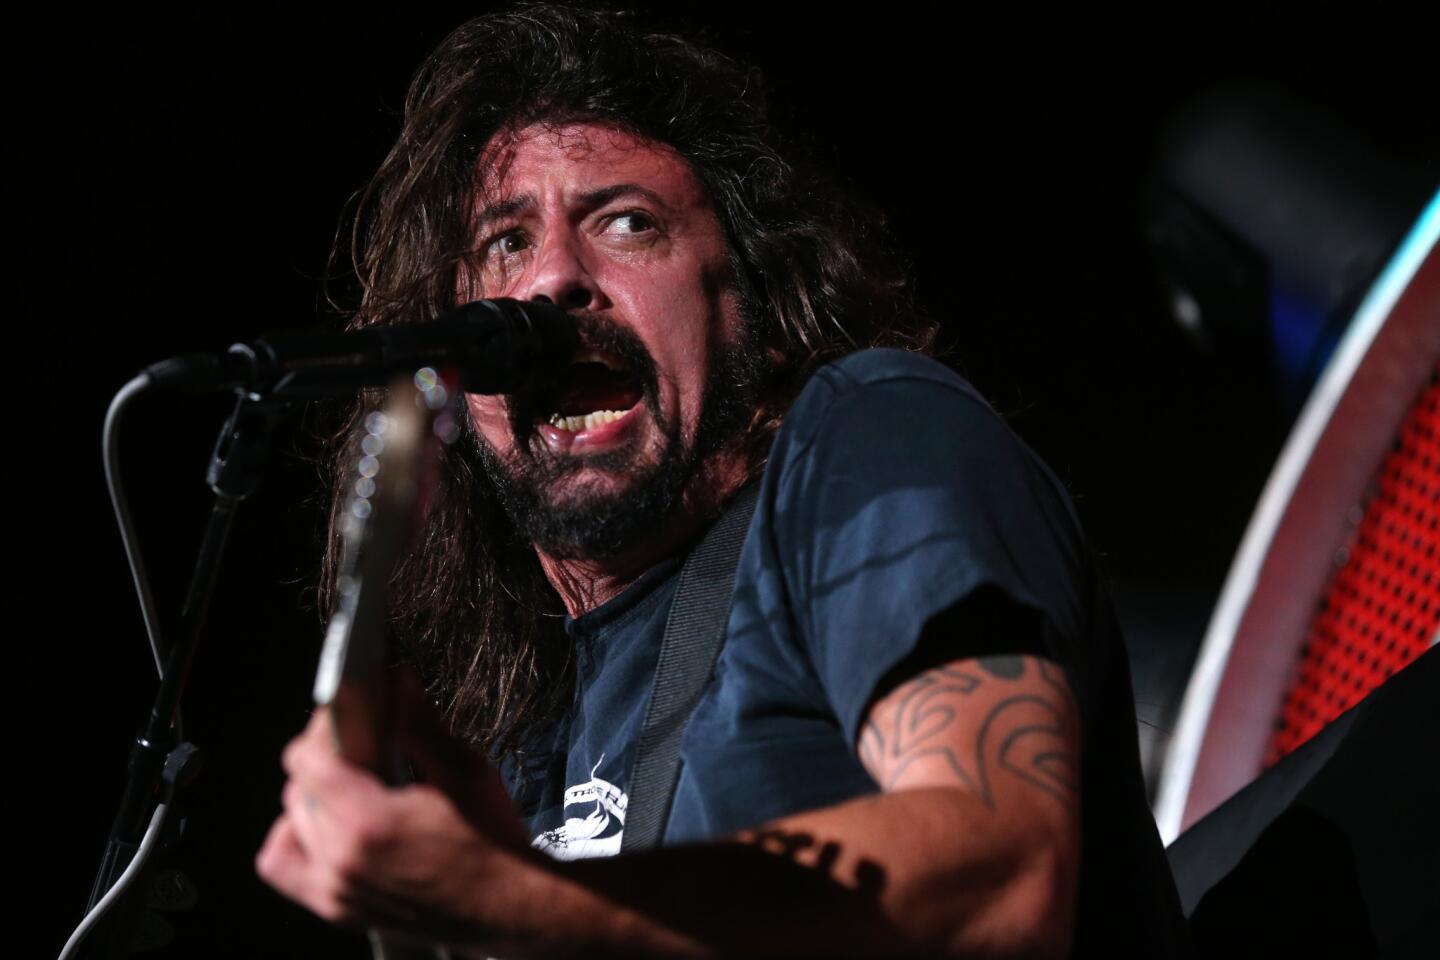 Dave Grohl leads the band Foo Fighters during a concert at Wrigley Field in Chicago on Saturday, August 29, 2015.